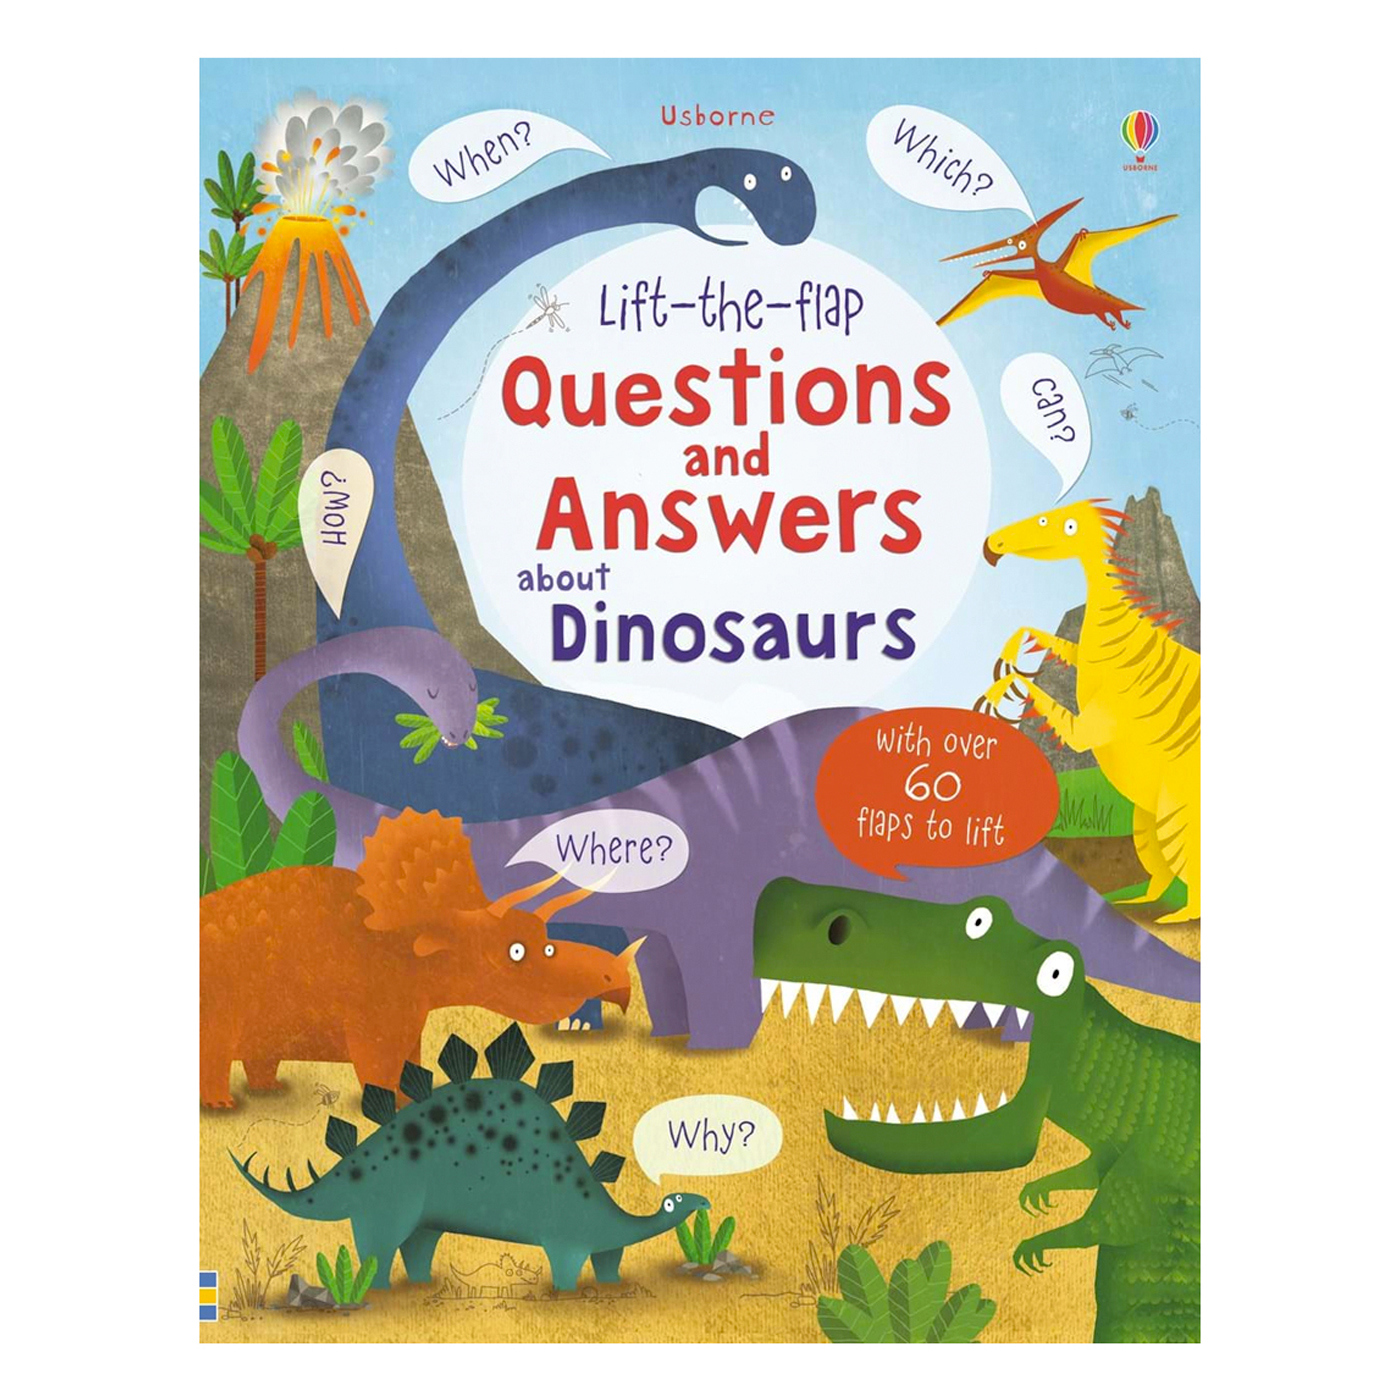  Questions and Answers: Dinosaurs